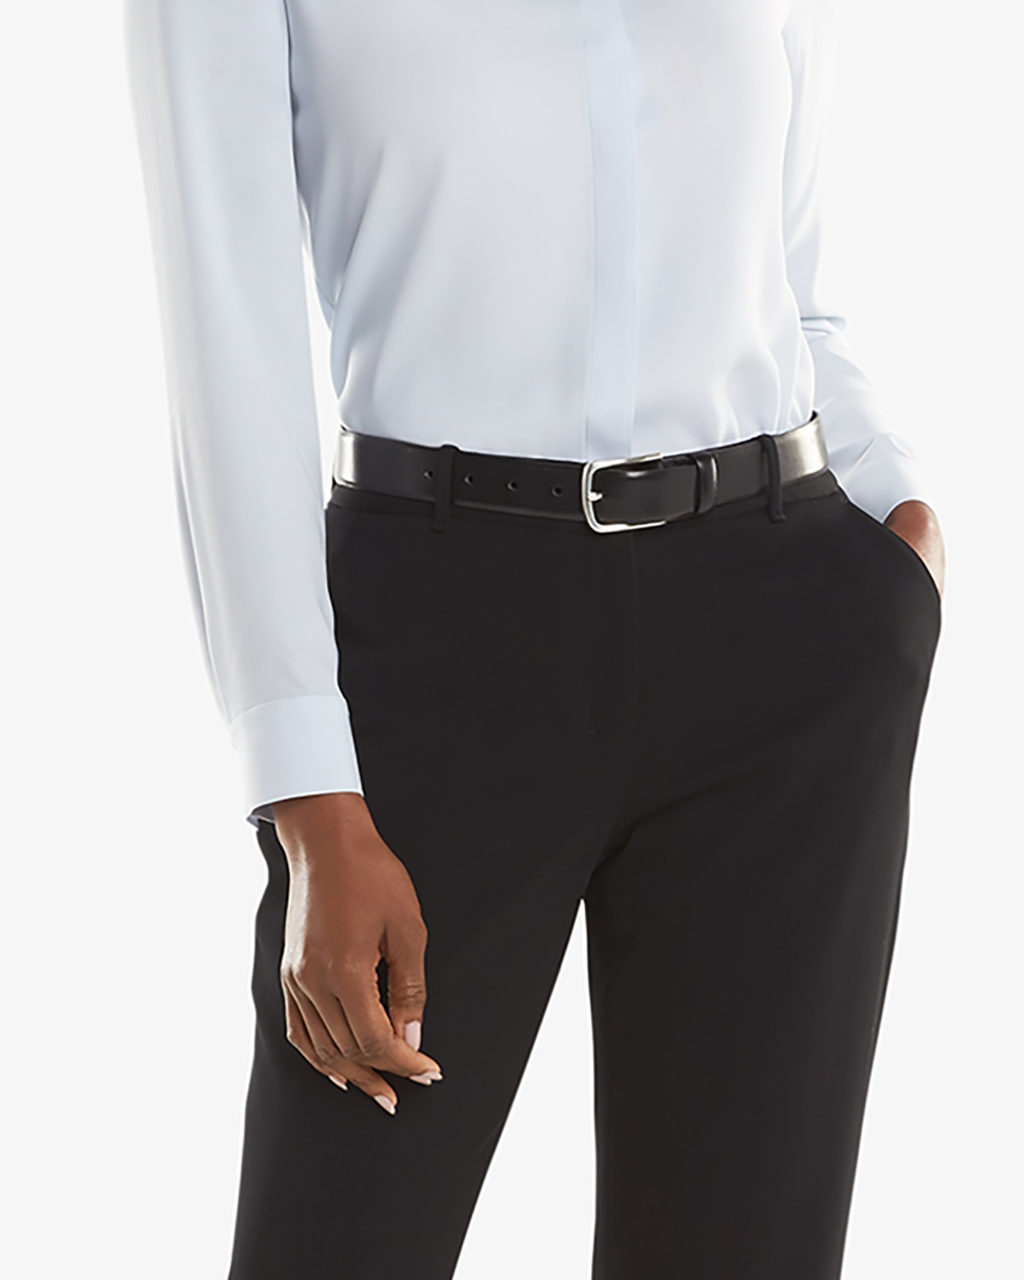 How Dress Pants Should Fit: A Workwear Shopping Guide